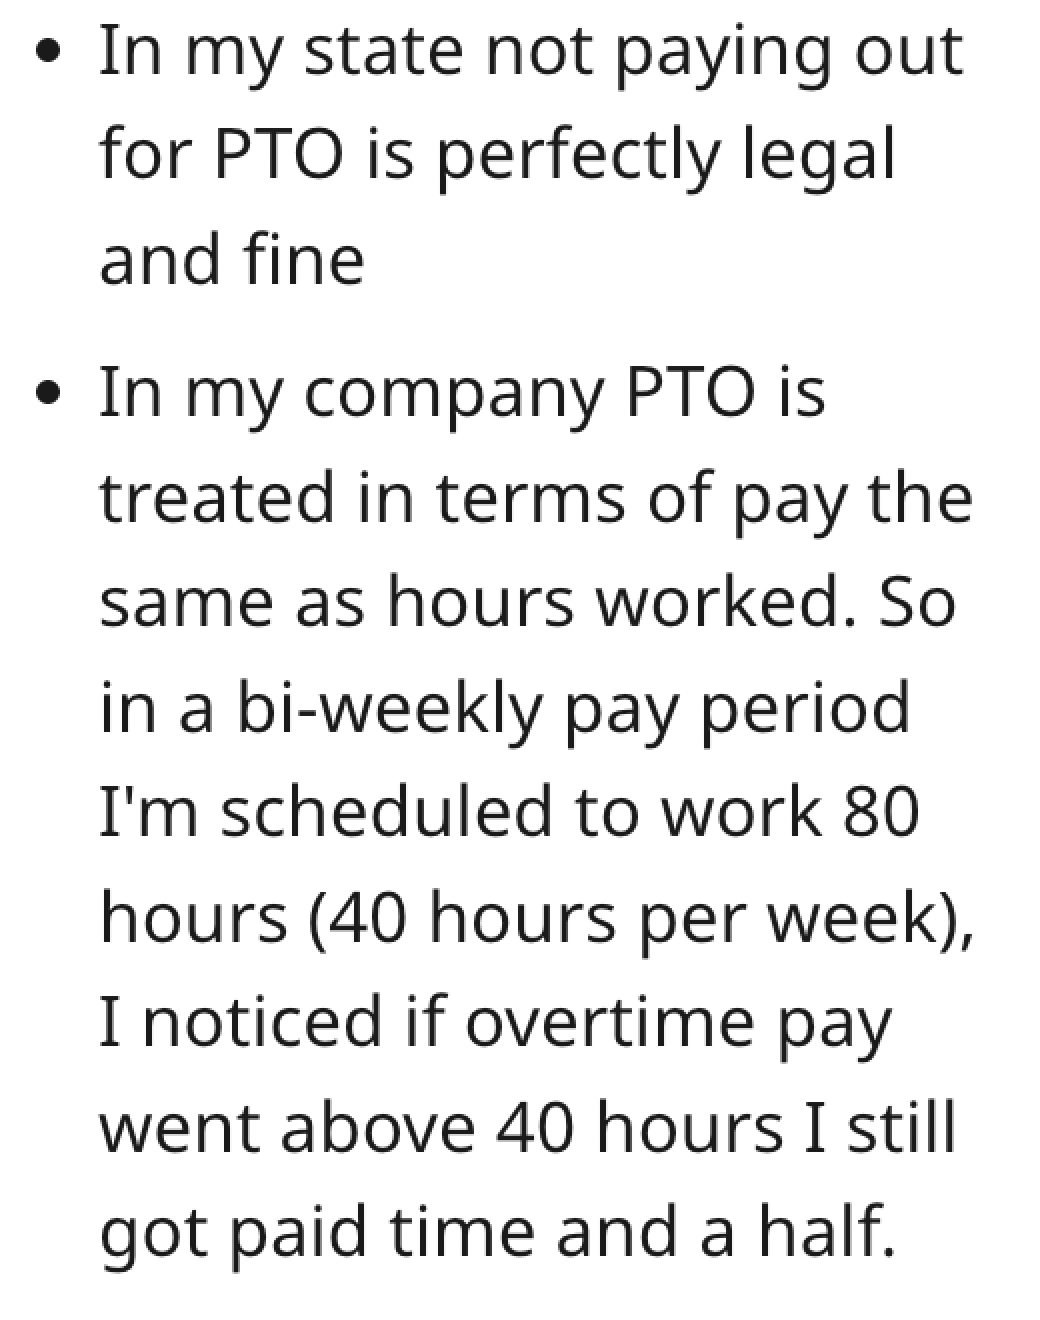 handwriting - In my state not paying out for Pto is perfectly legal and fine In my company Pto is treated in terms of pay the same as hours worked. So in a biweekly pay period I'm scheduled to work 80 hours 40 hours per week, I noticed if overtime pay wen